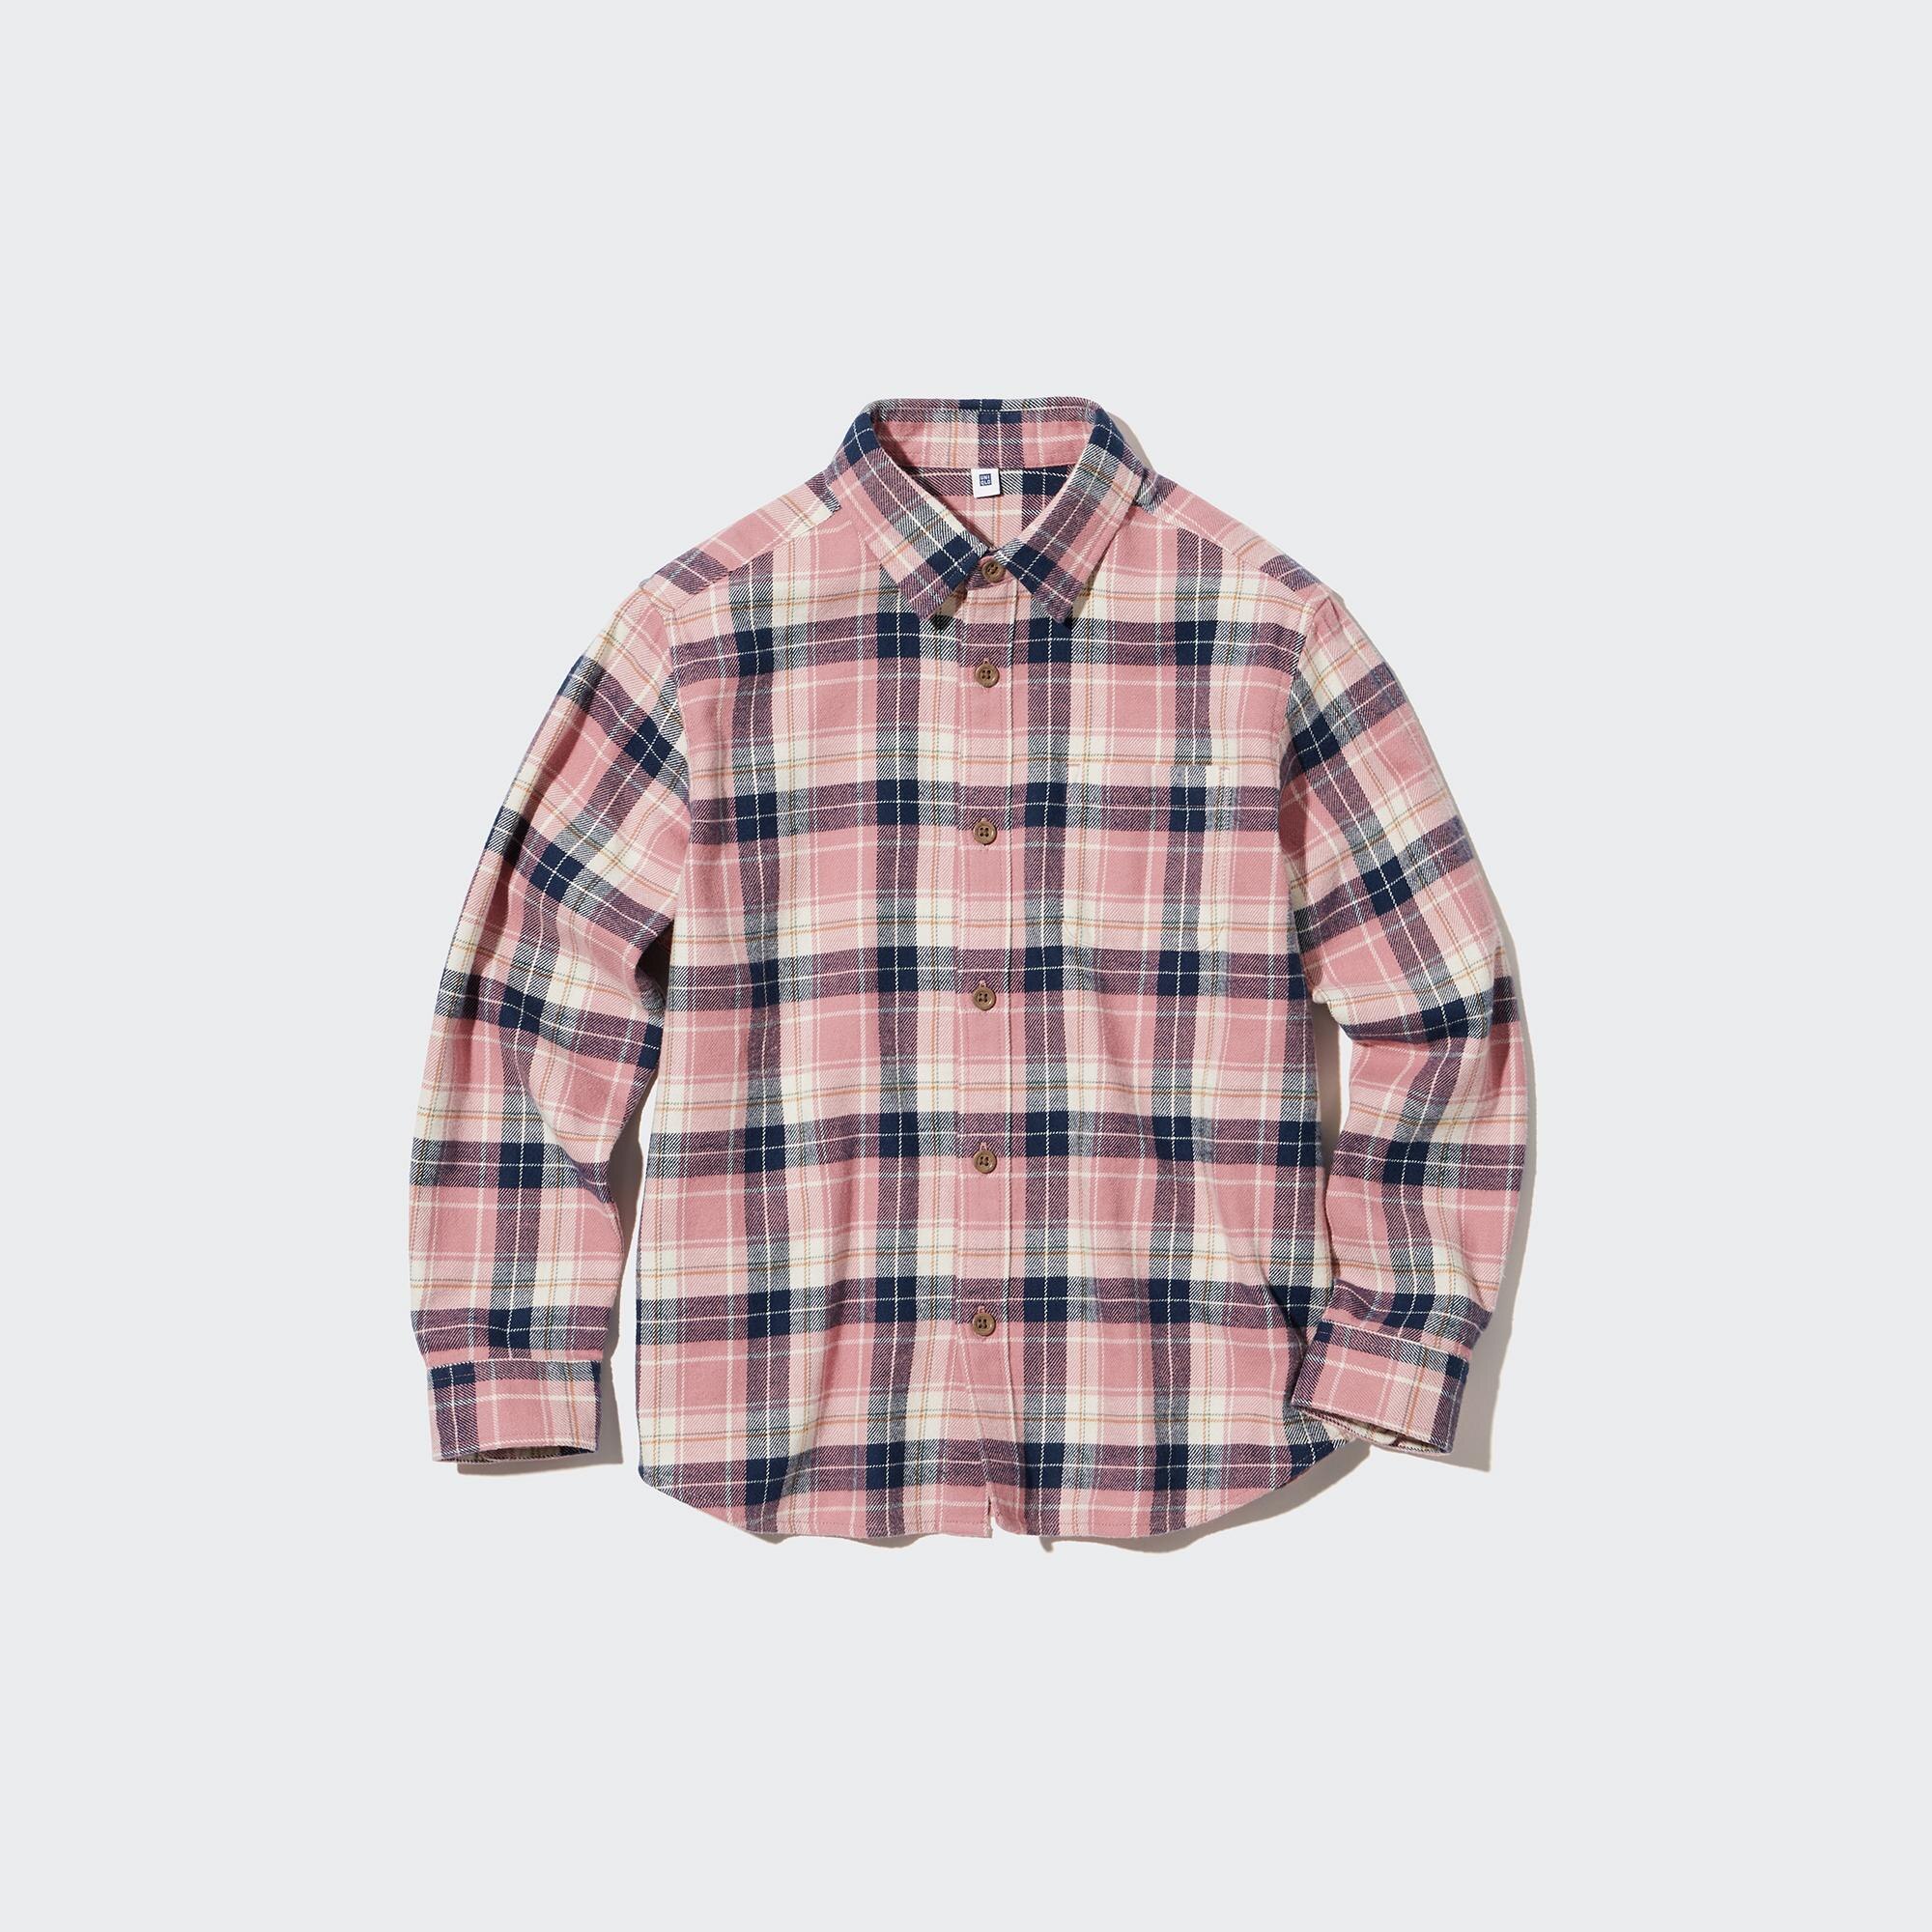 KIDS FLANNEL CHECKED LONG SLEEVE SHIRT  UNIQLO VN